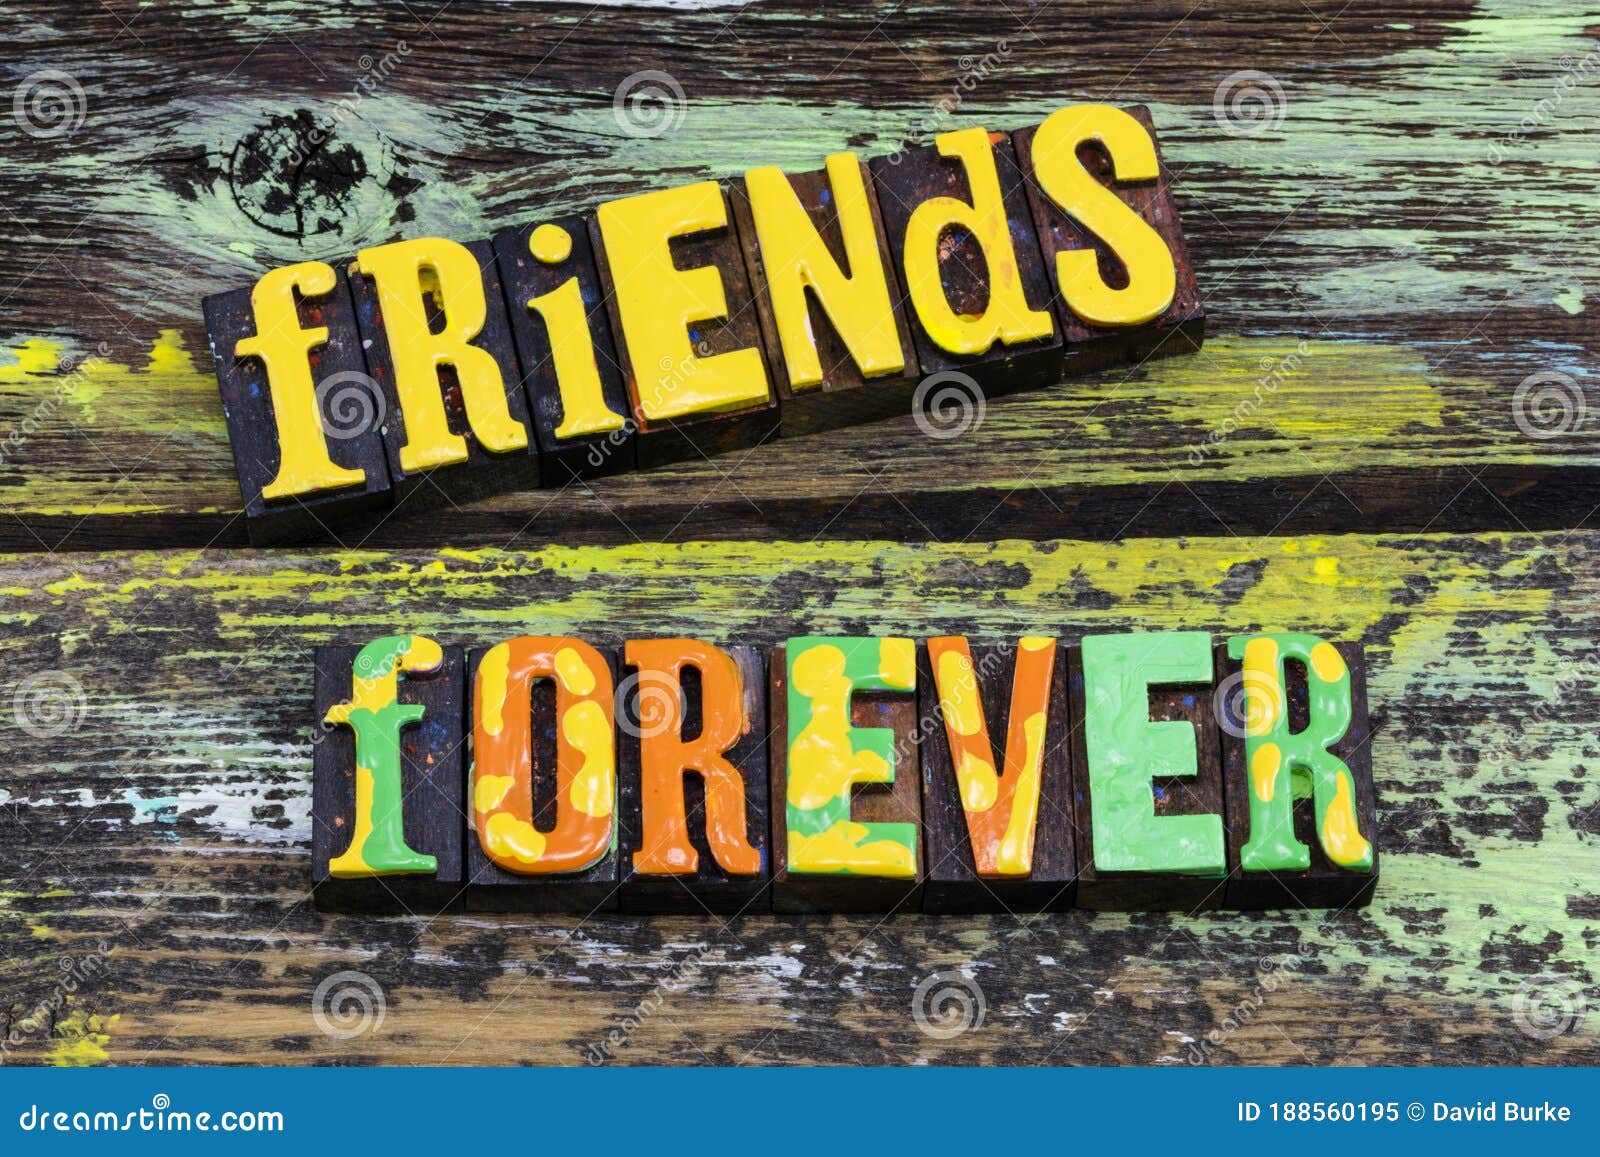 Friends Forever Together Happy Friendship Relationship Stock Image ...